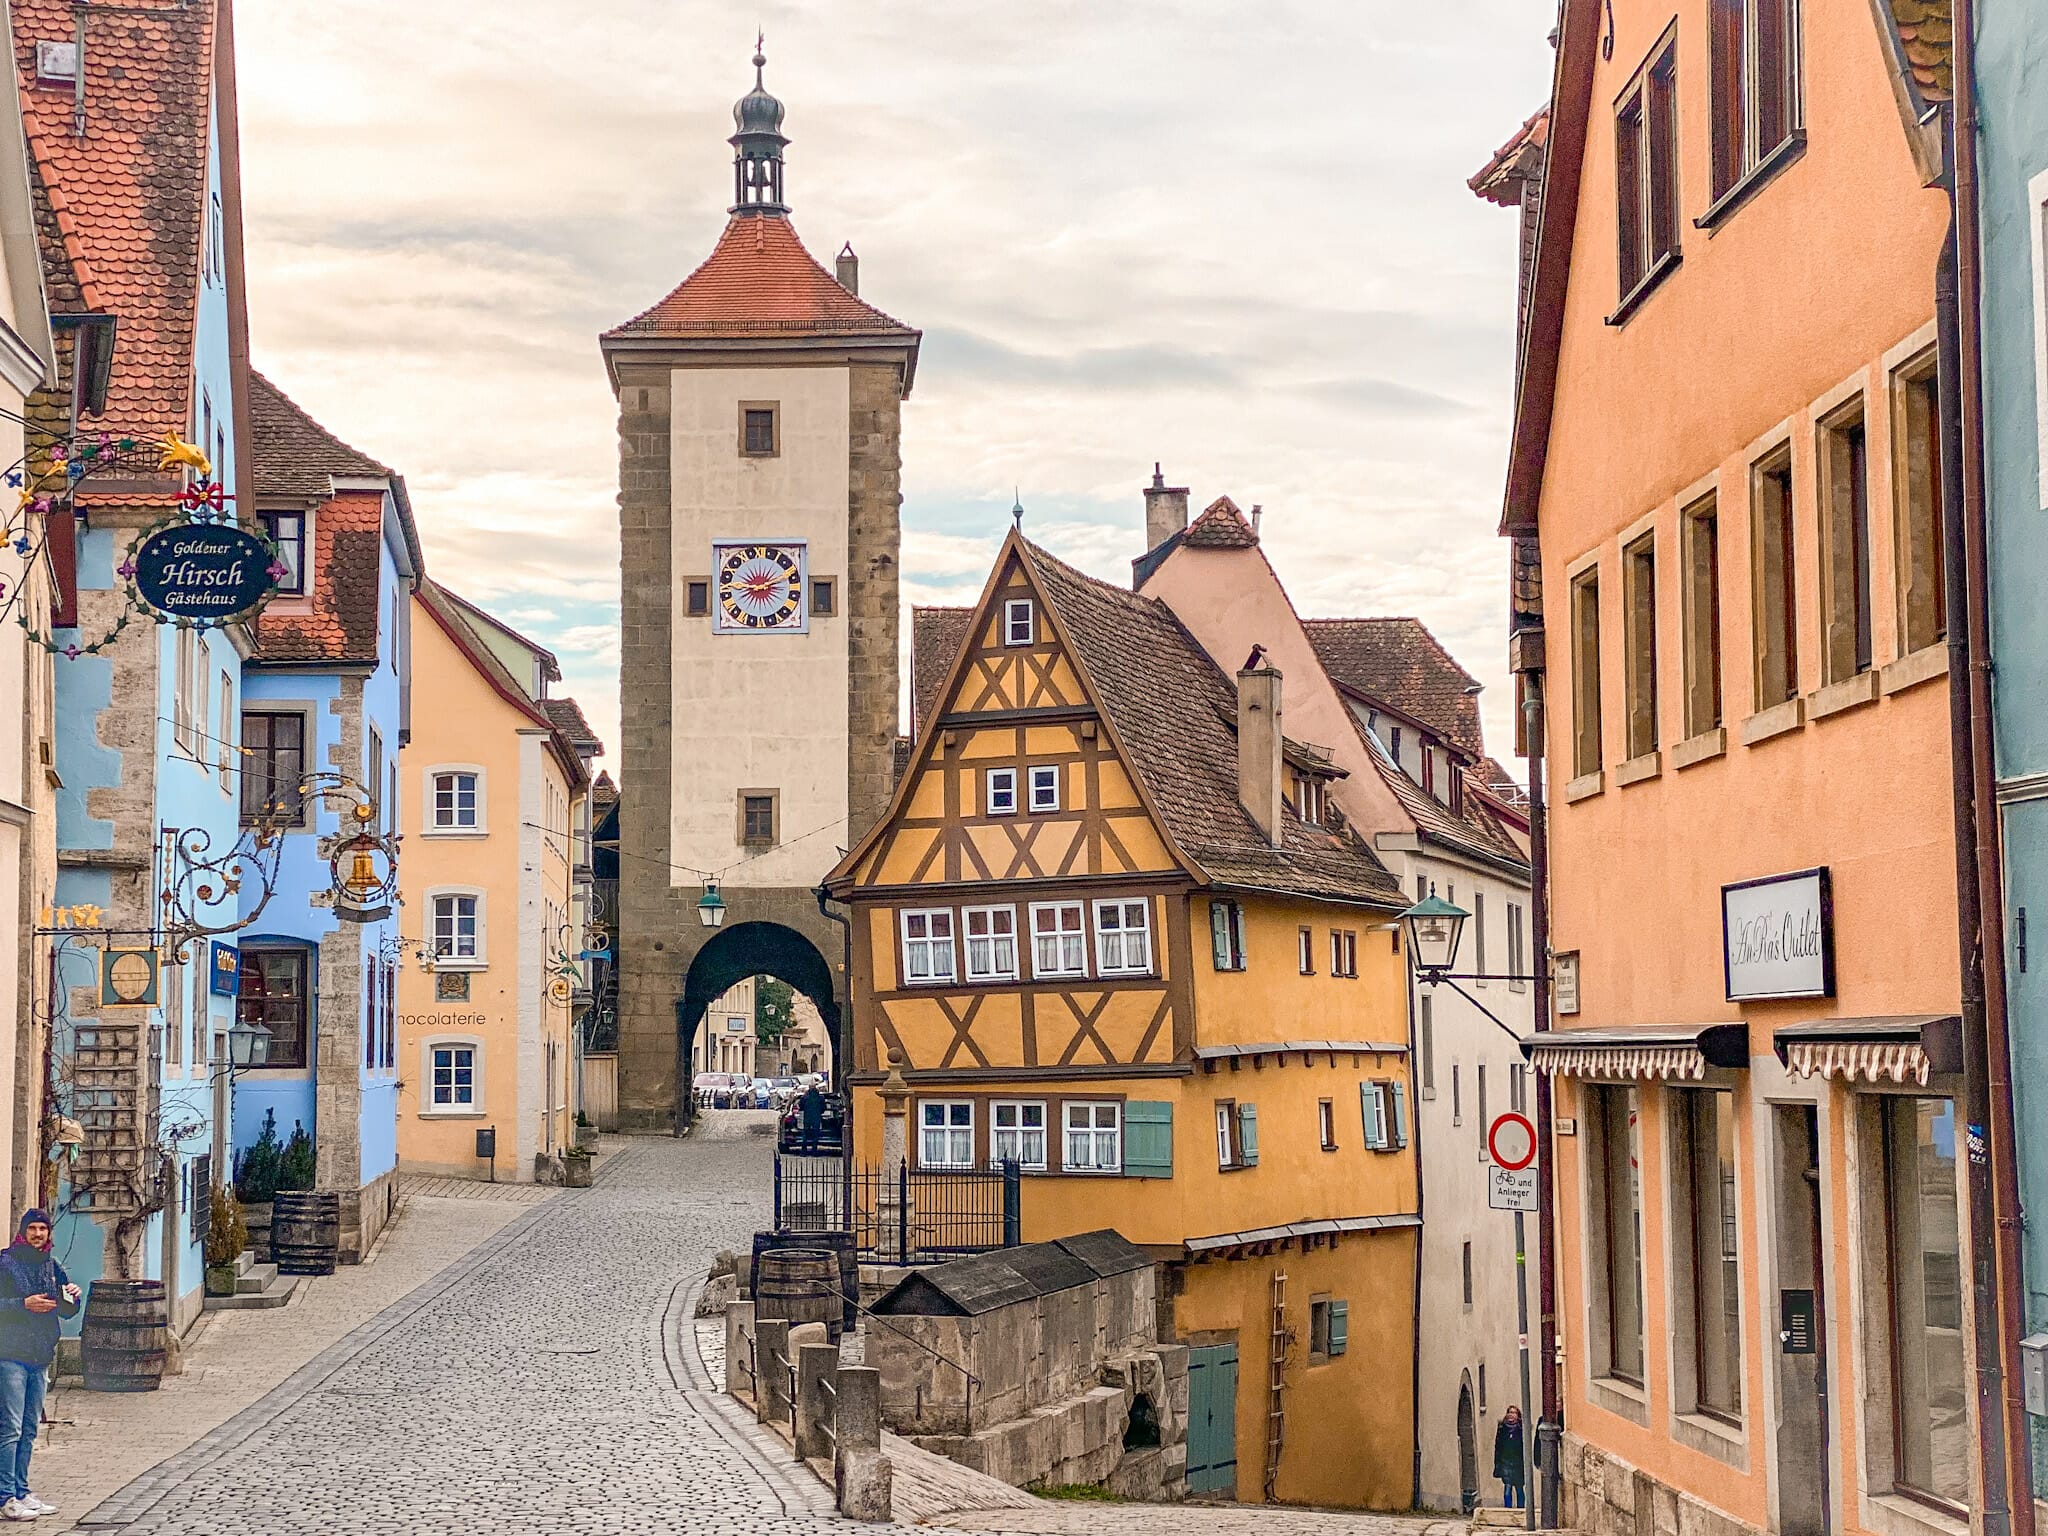 20 Best Things to do in Rothenburg ob der Tauber, Germany - life of brit